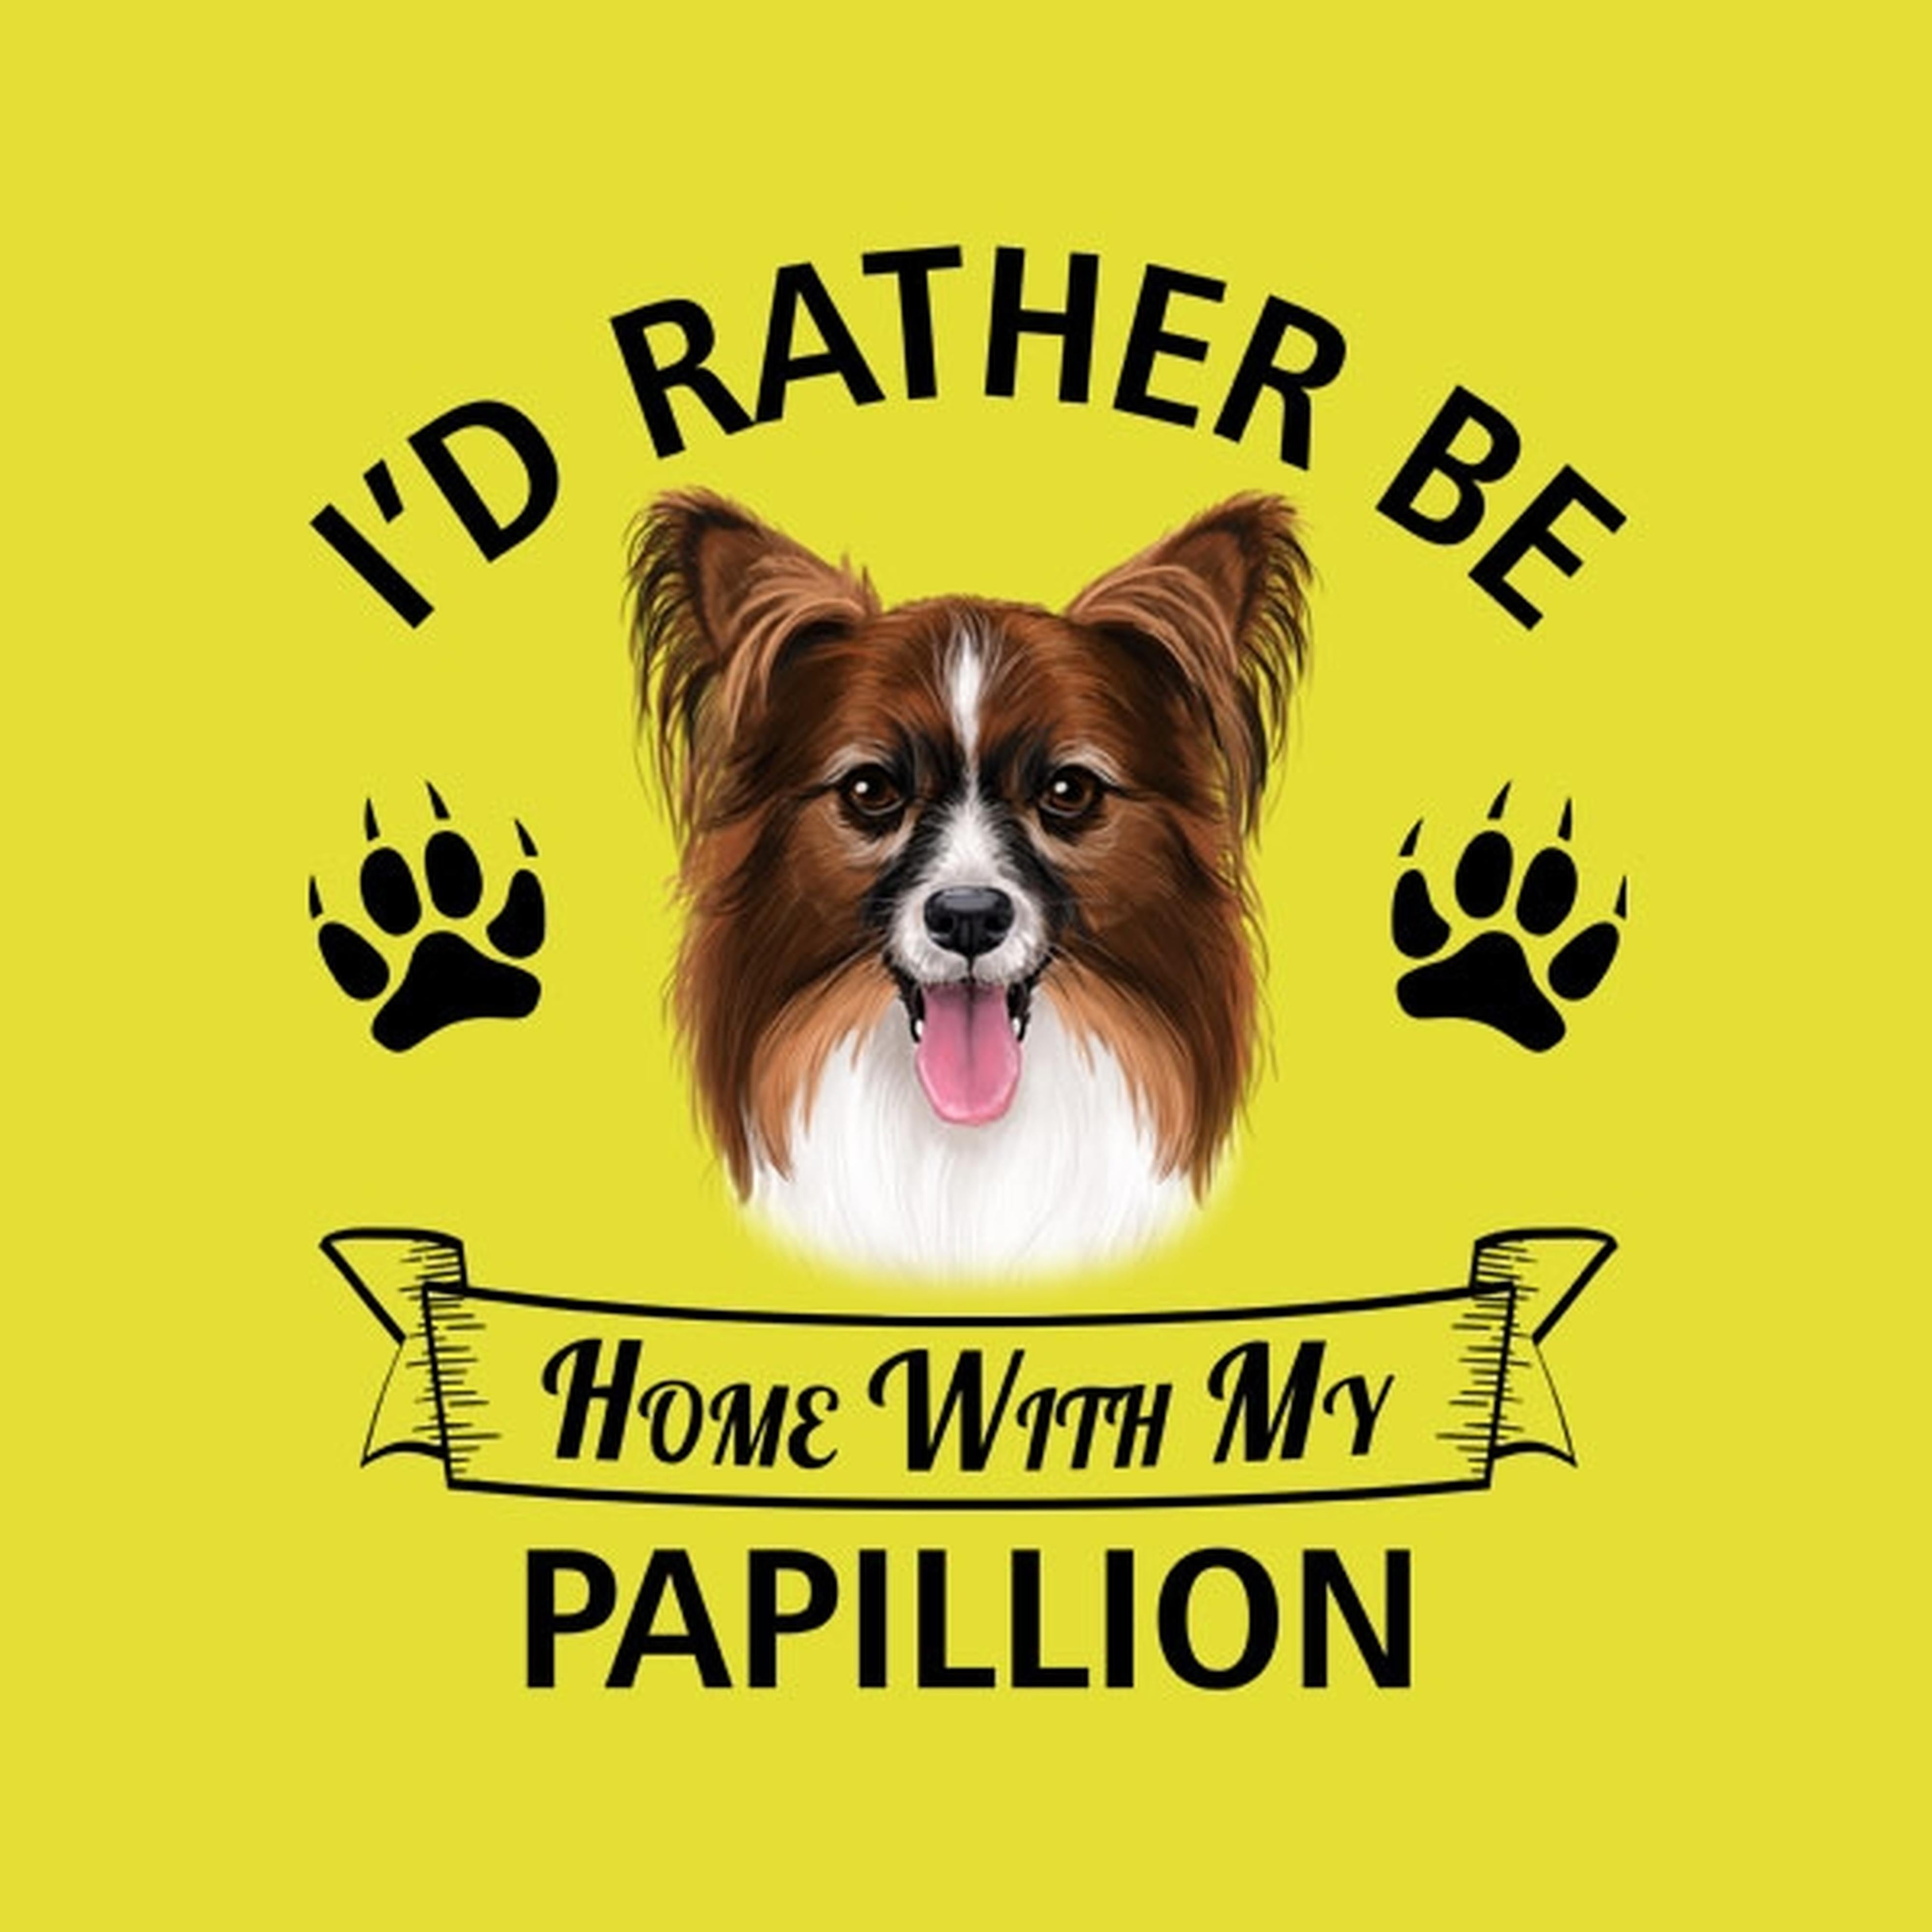 I'd rather stay home with my Papillion - T-shirt